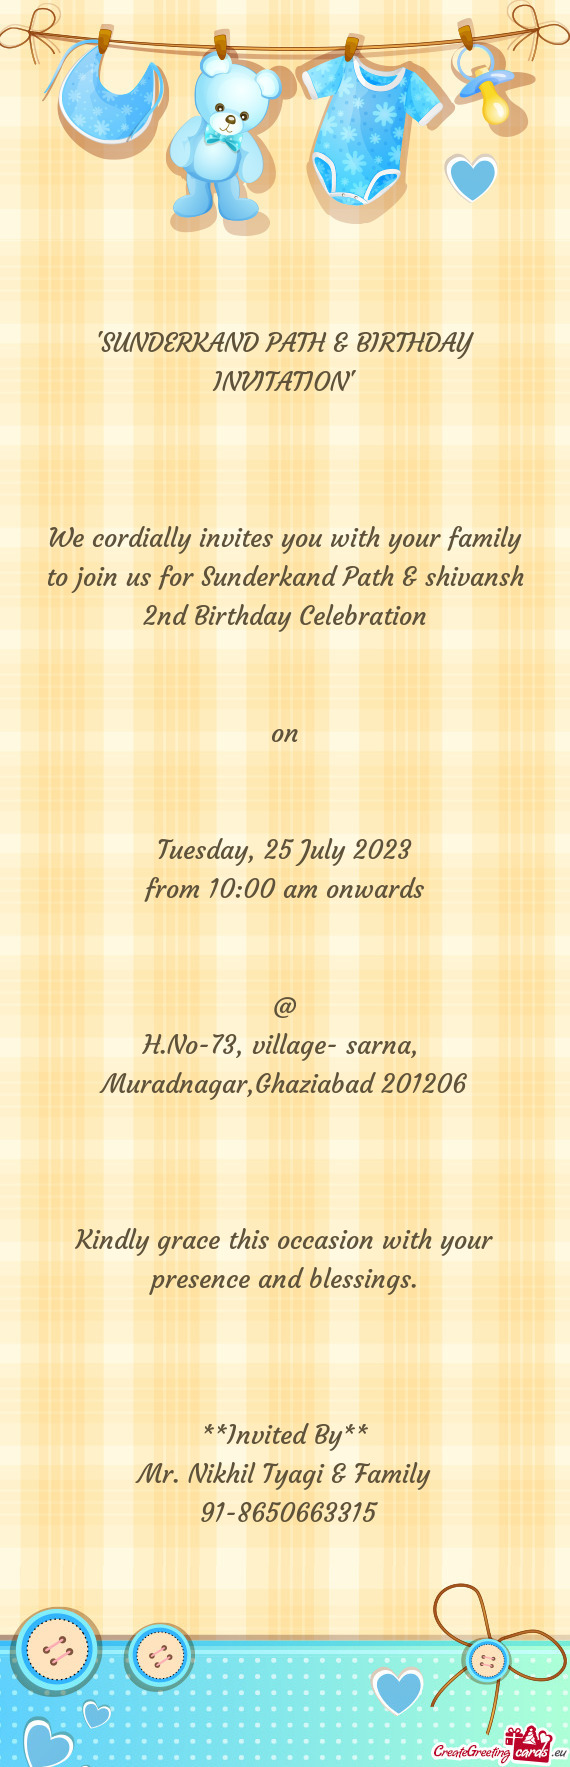 We cordially invites you with your family to join us for Sunderkand Path & shivansh 2nd Birthday Cel